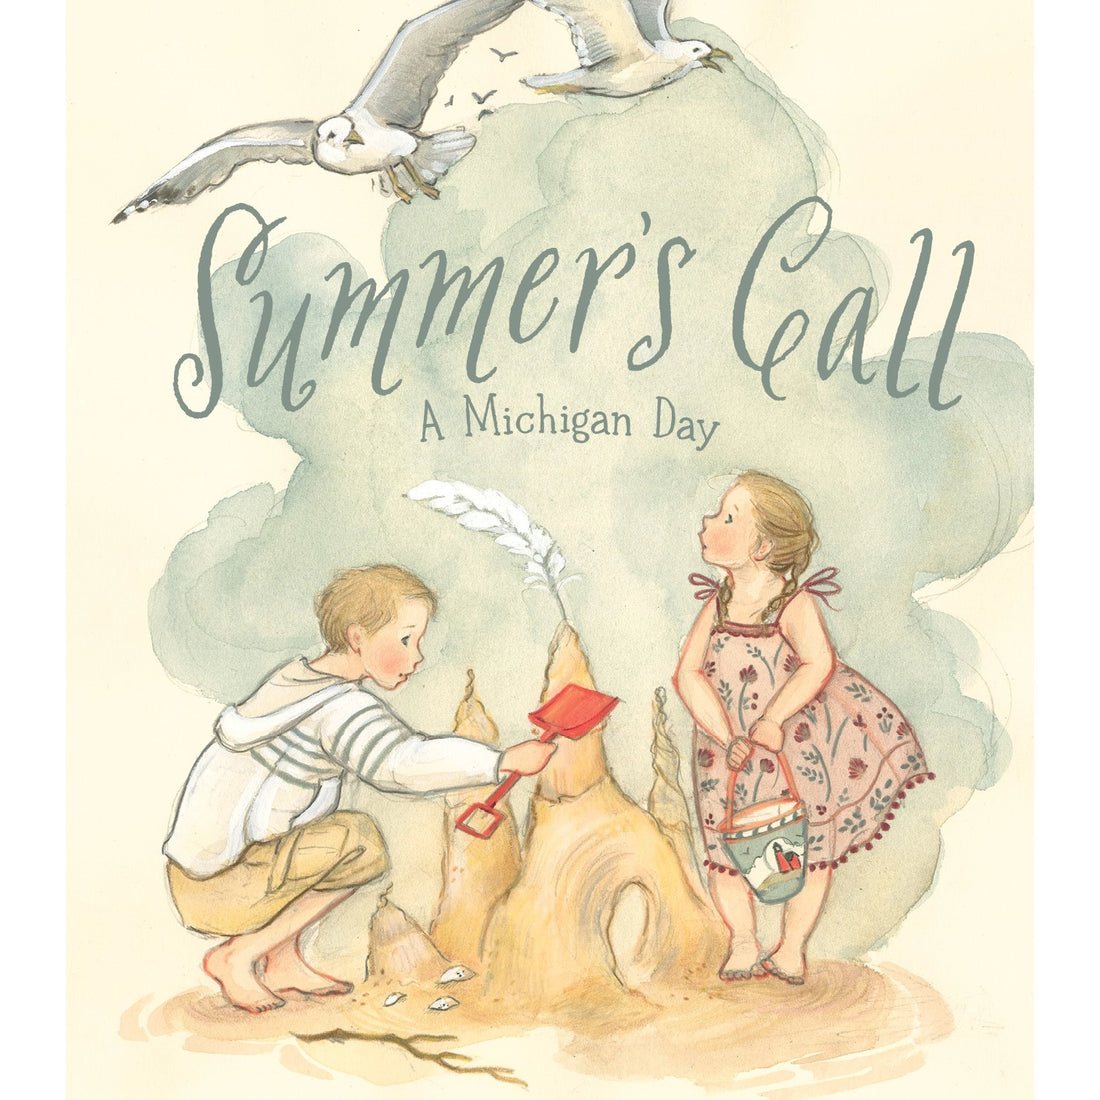 Summer's Call: A Michigan Day